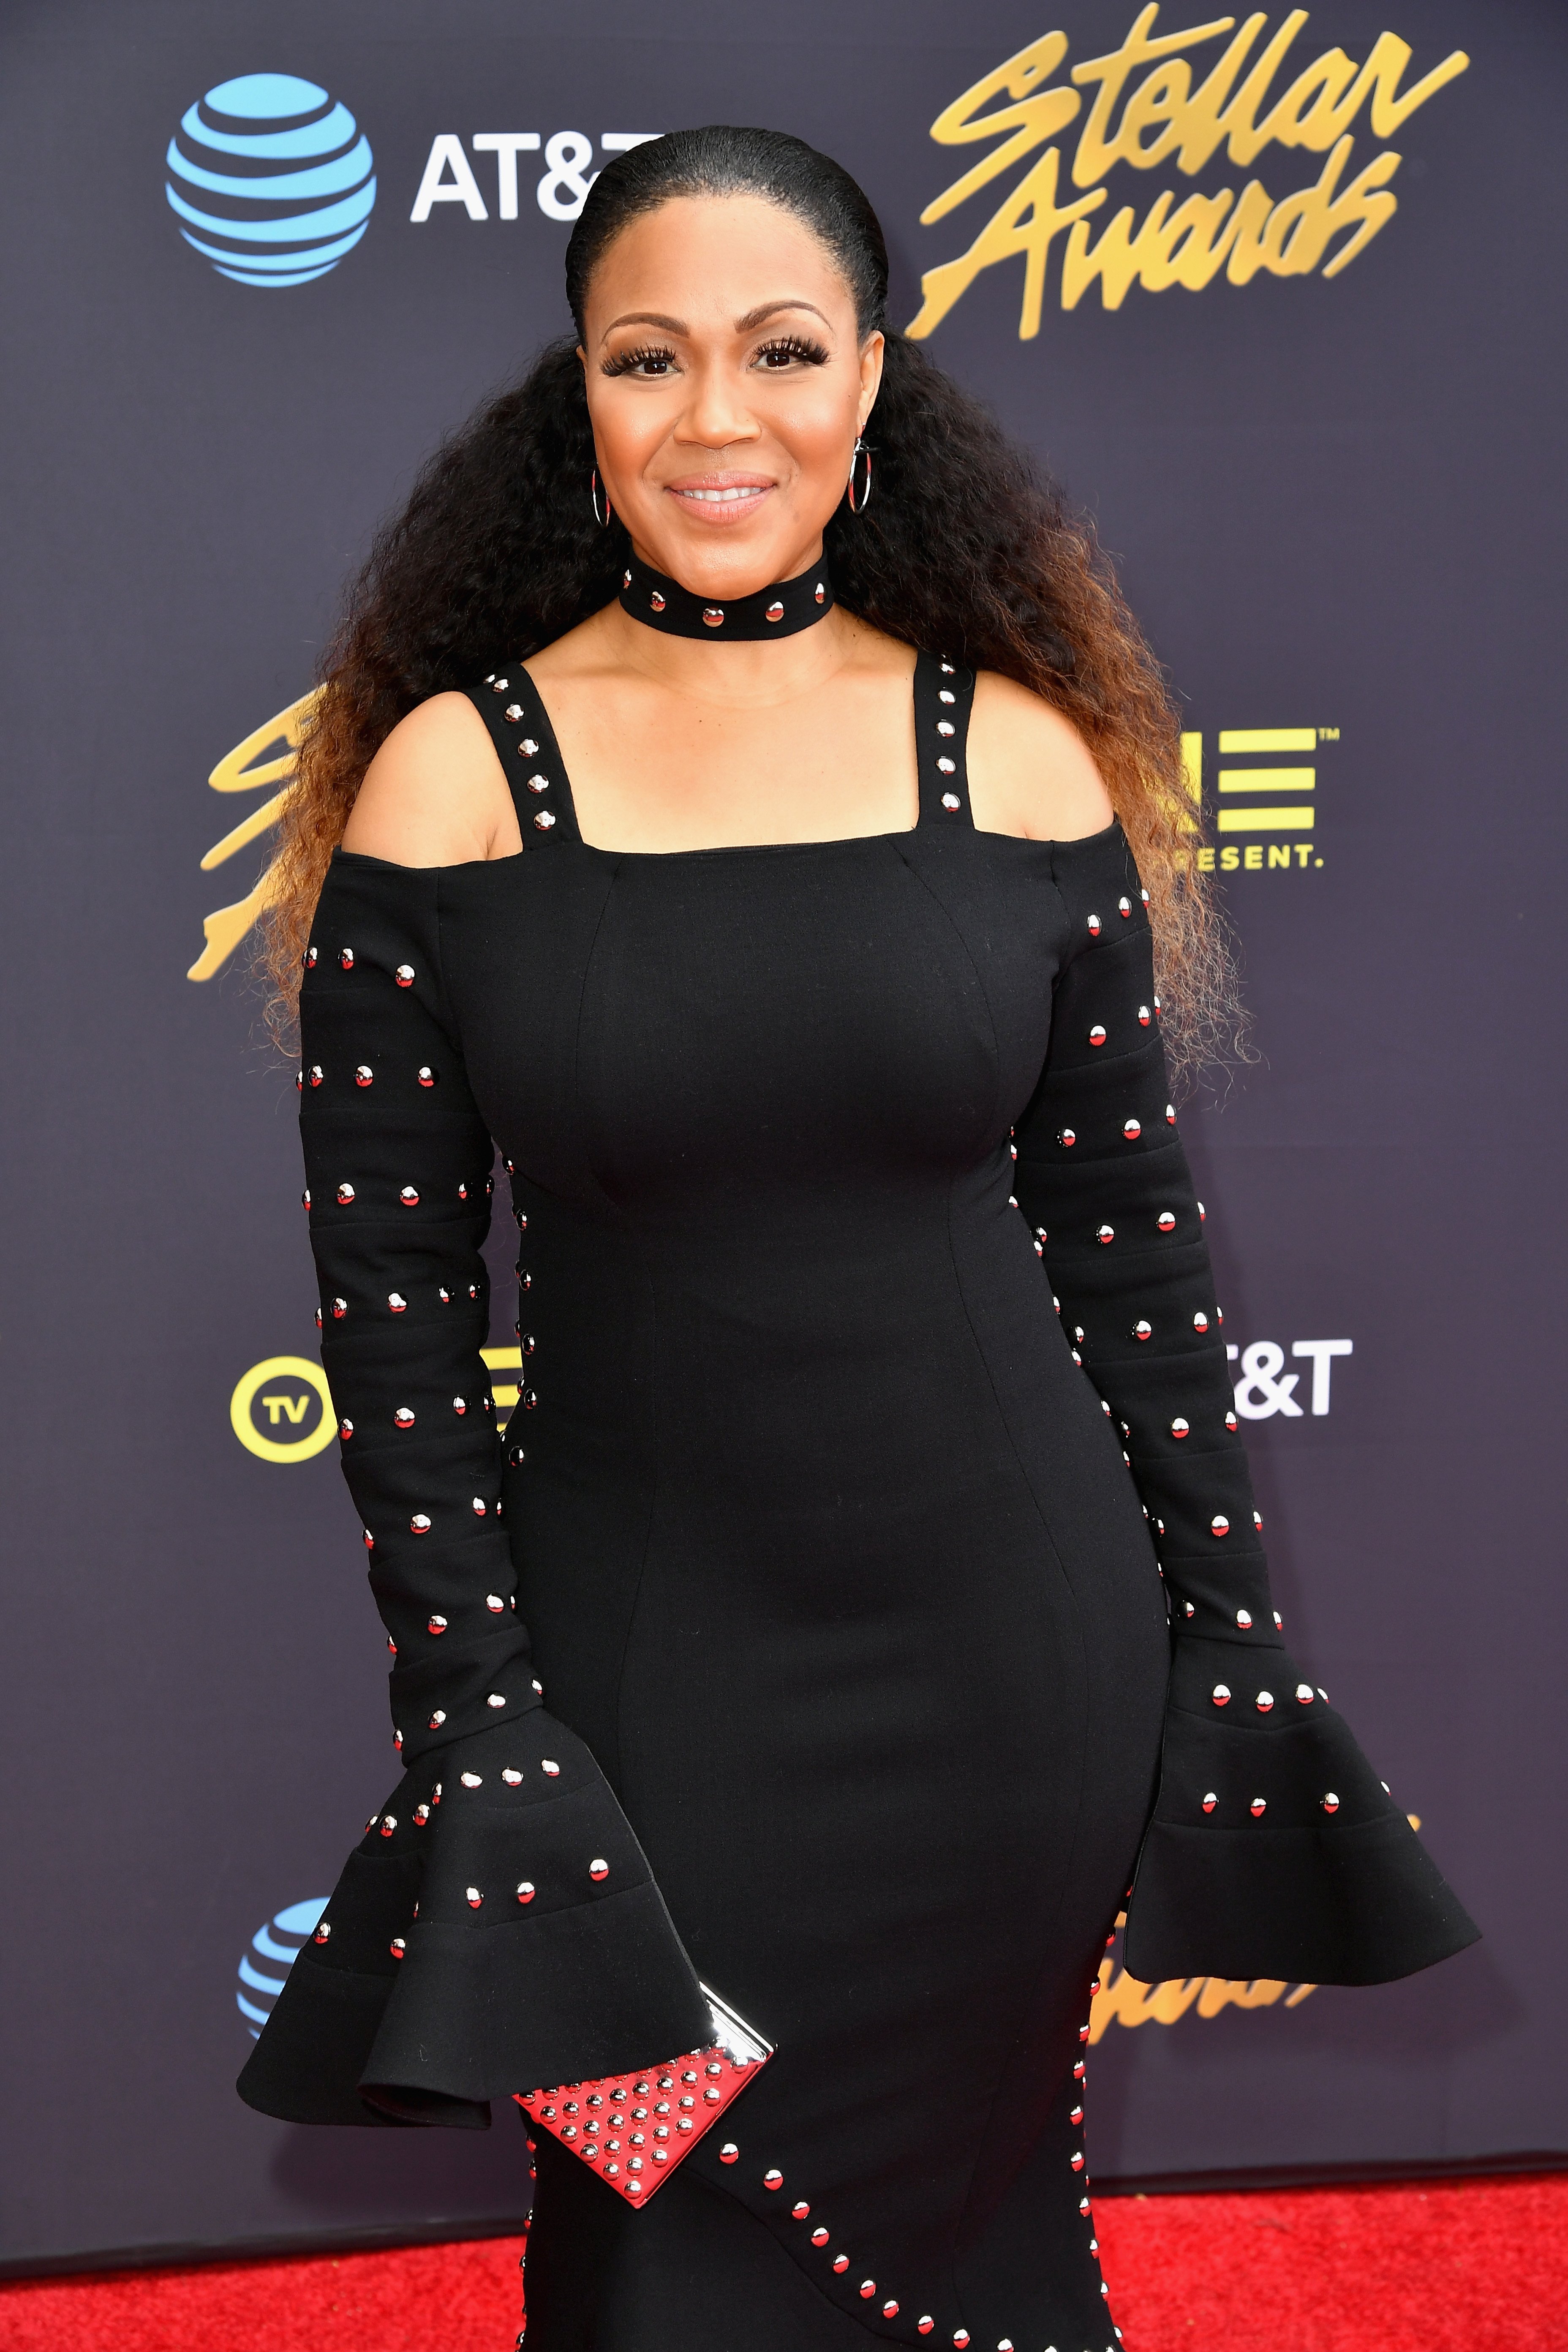 Erica Campbell at the Stellar Gospel Music Awards in Las Vegas, Nevada on Mar. 25, 2017 | Photo: Getty Images